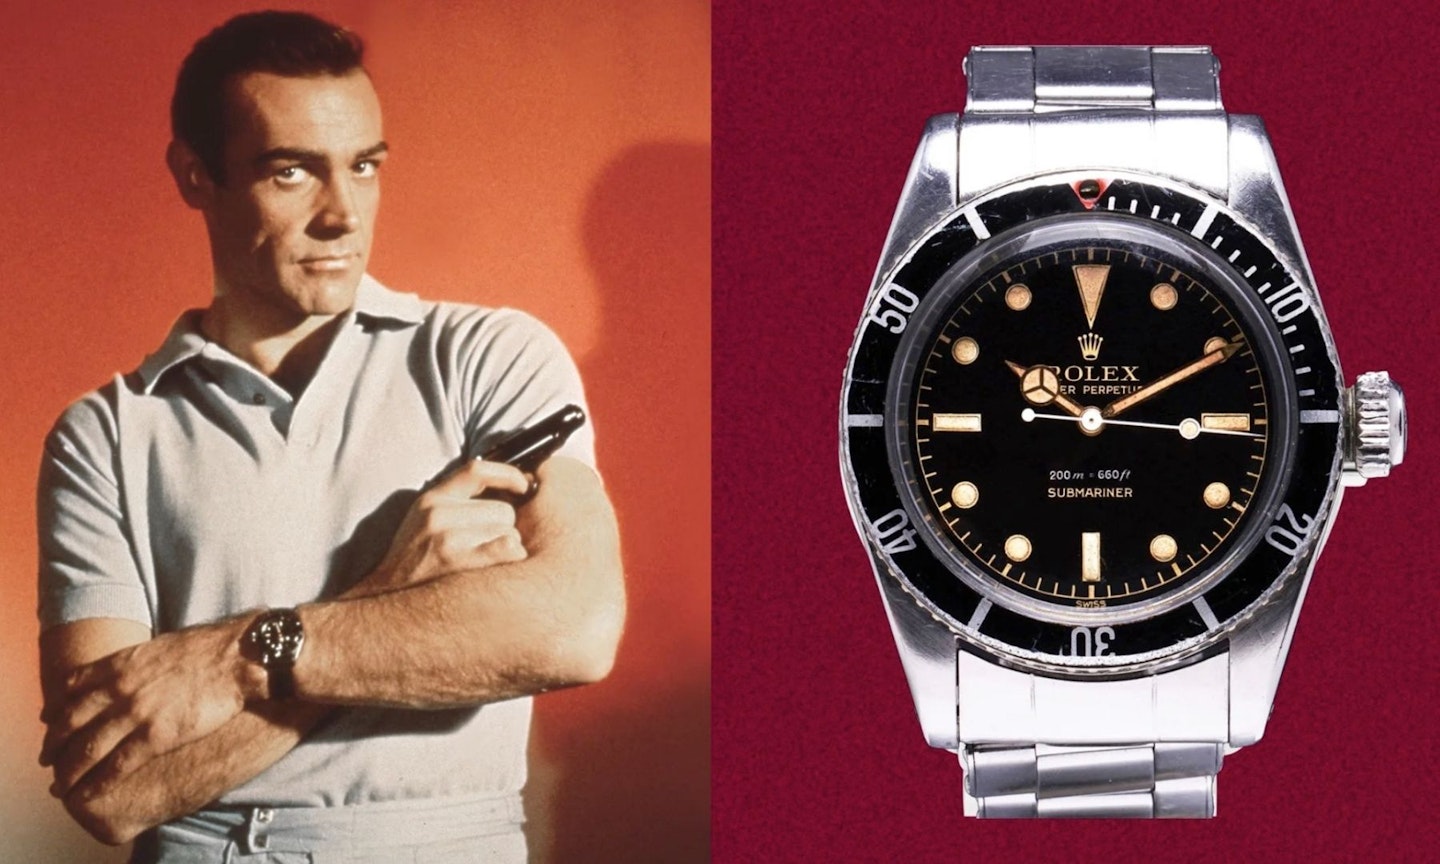 Sean Connery wearing a Rolex 6538 Submariner watch